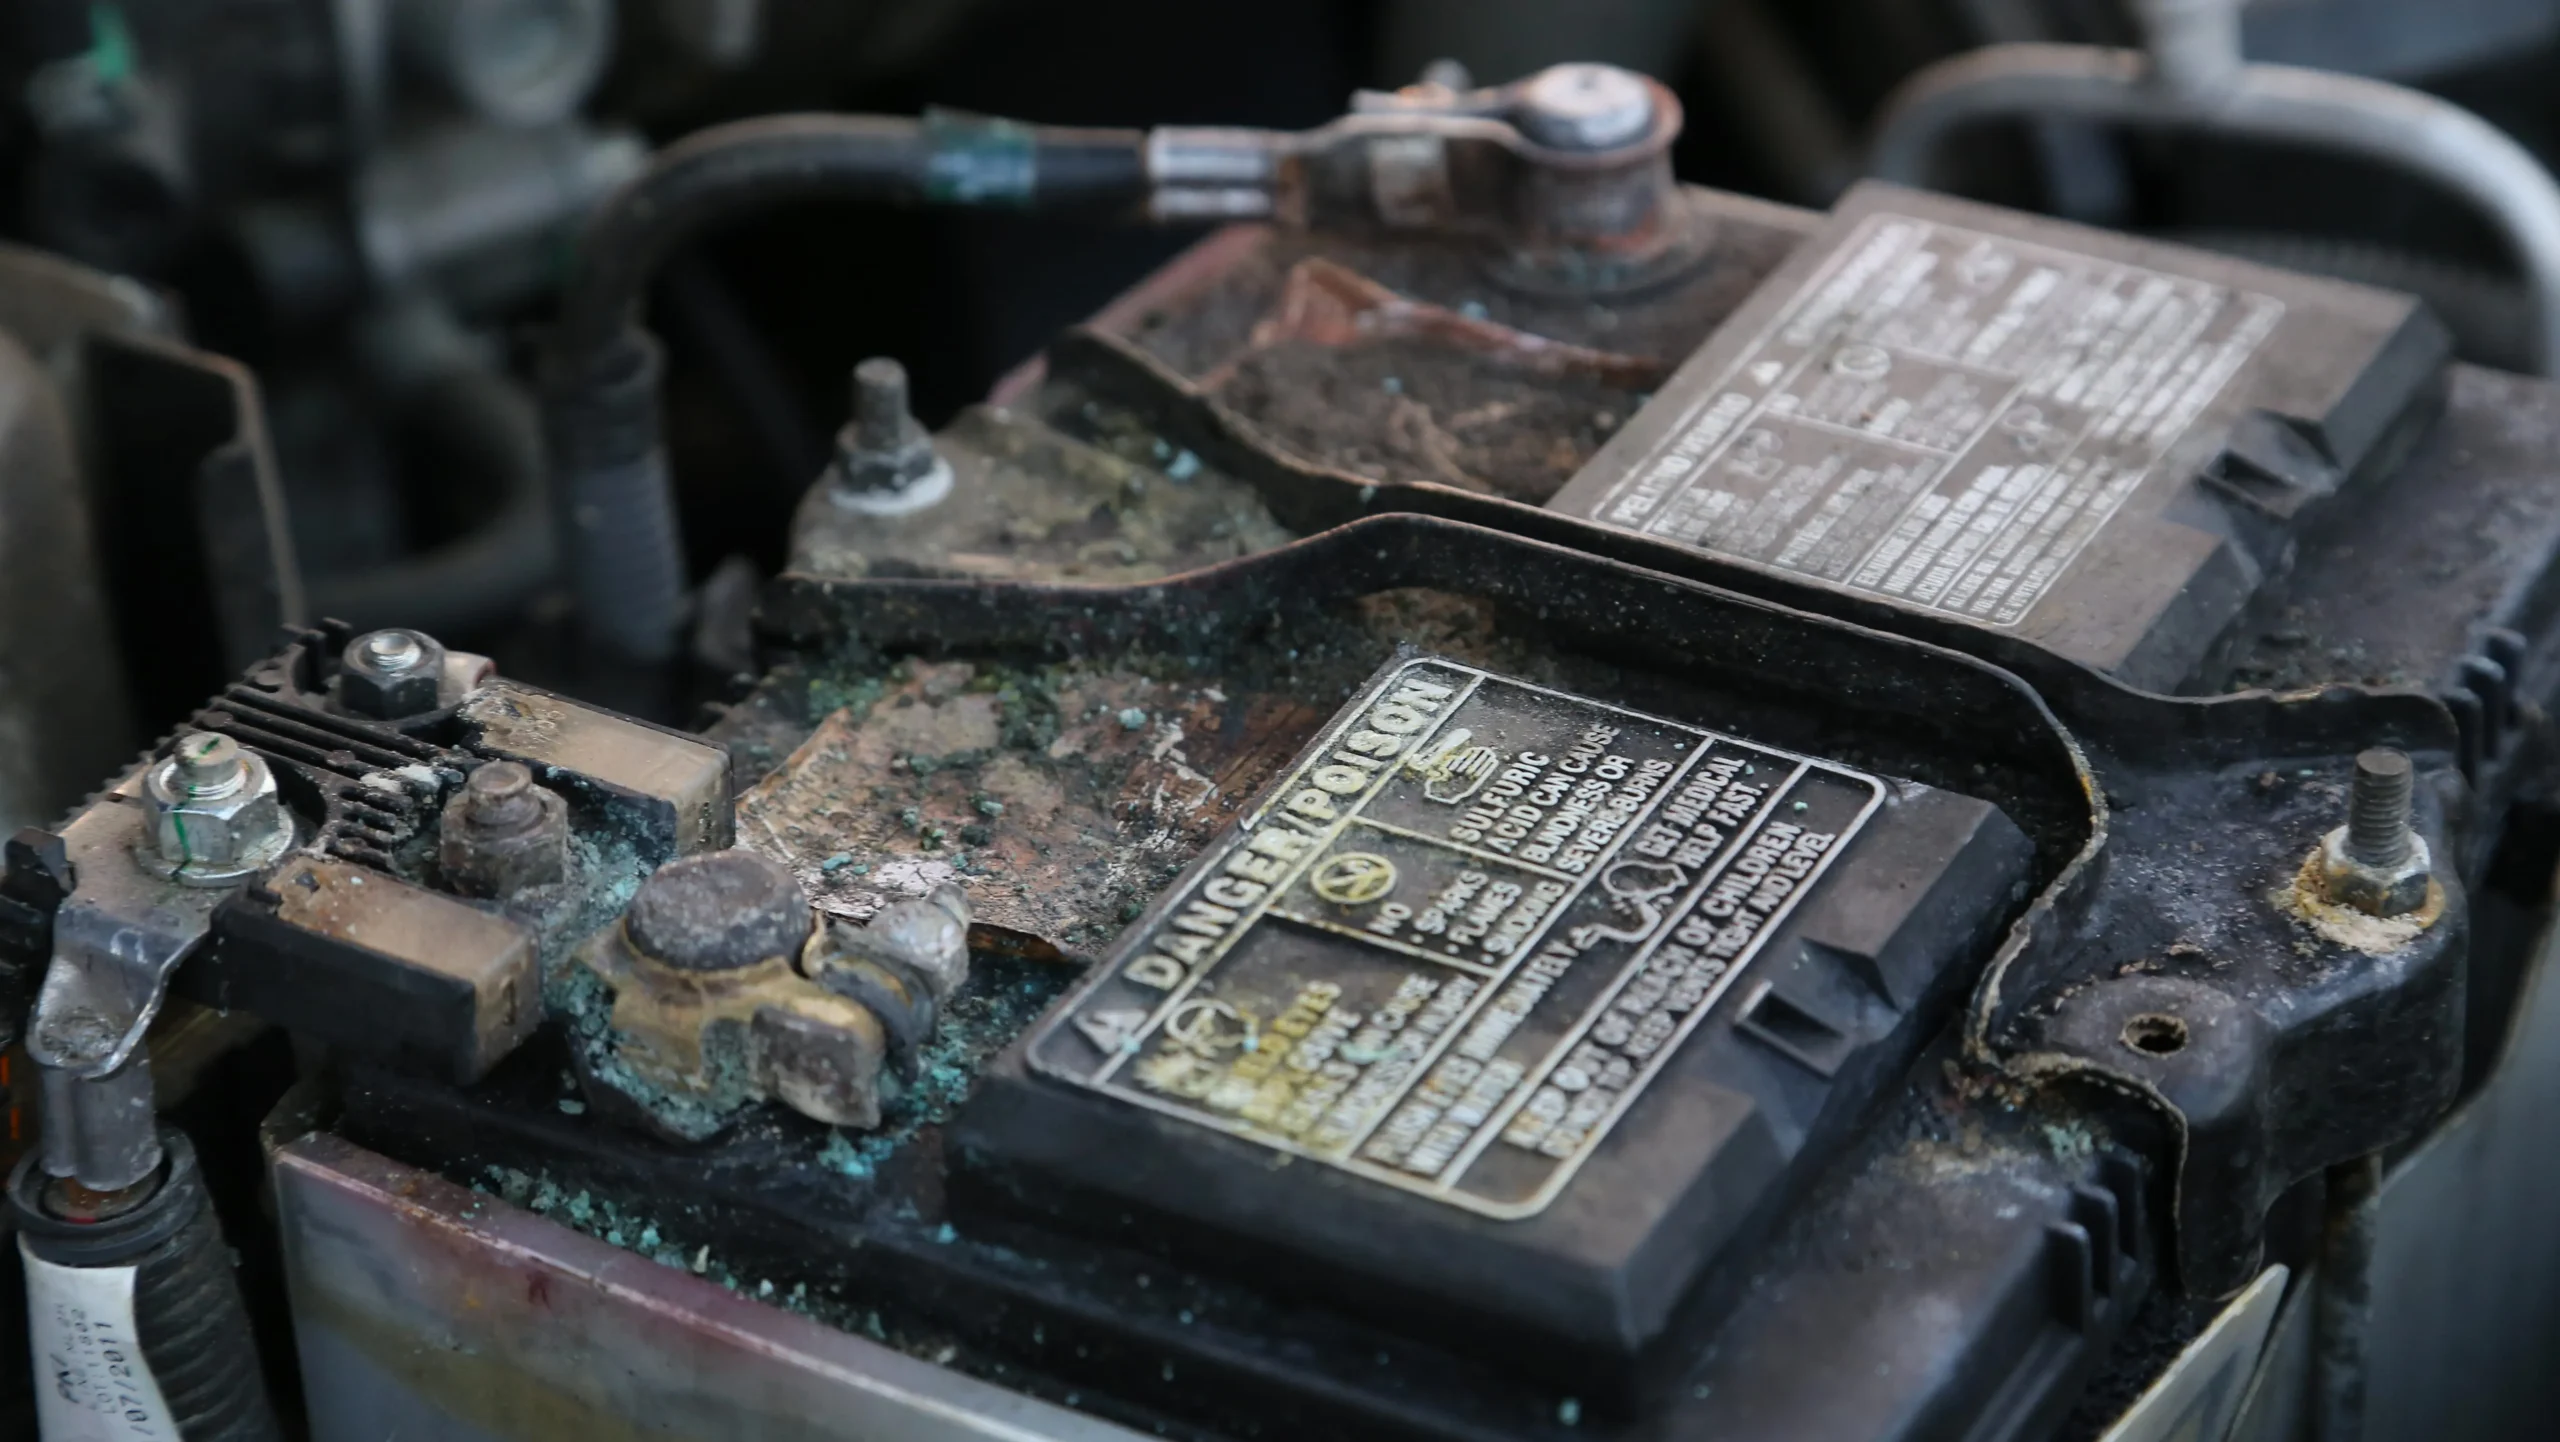 car battery popped and smoked - What happens when a car battery pops